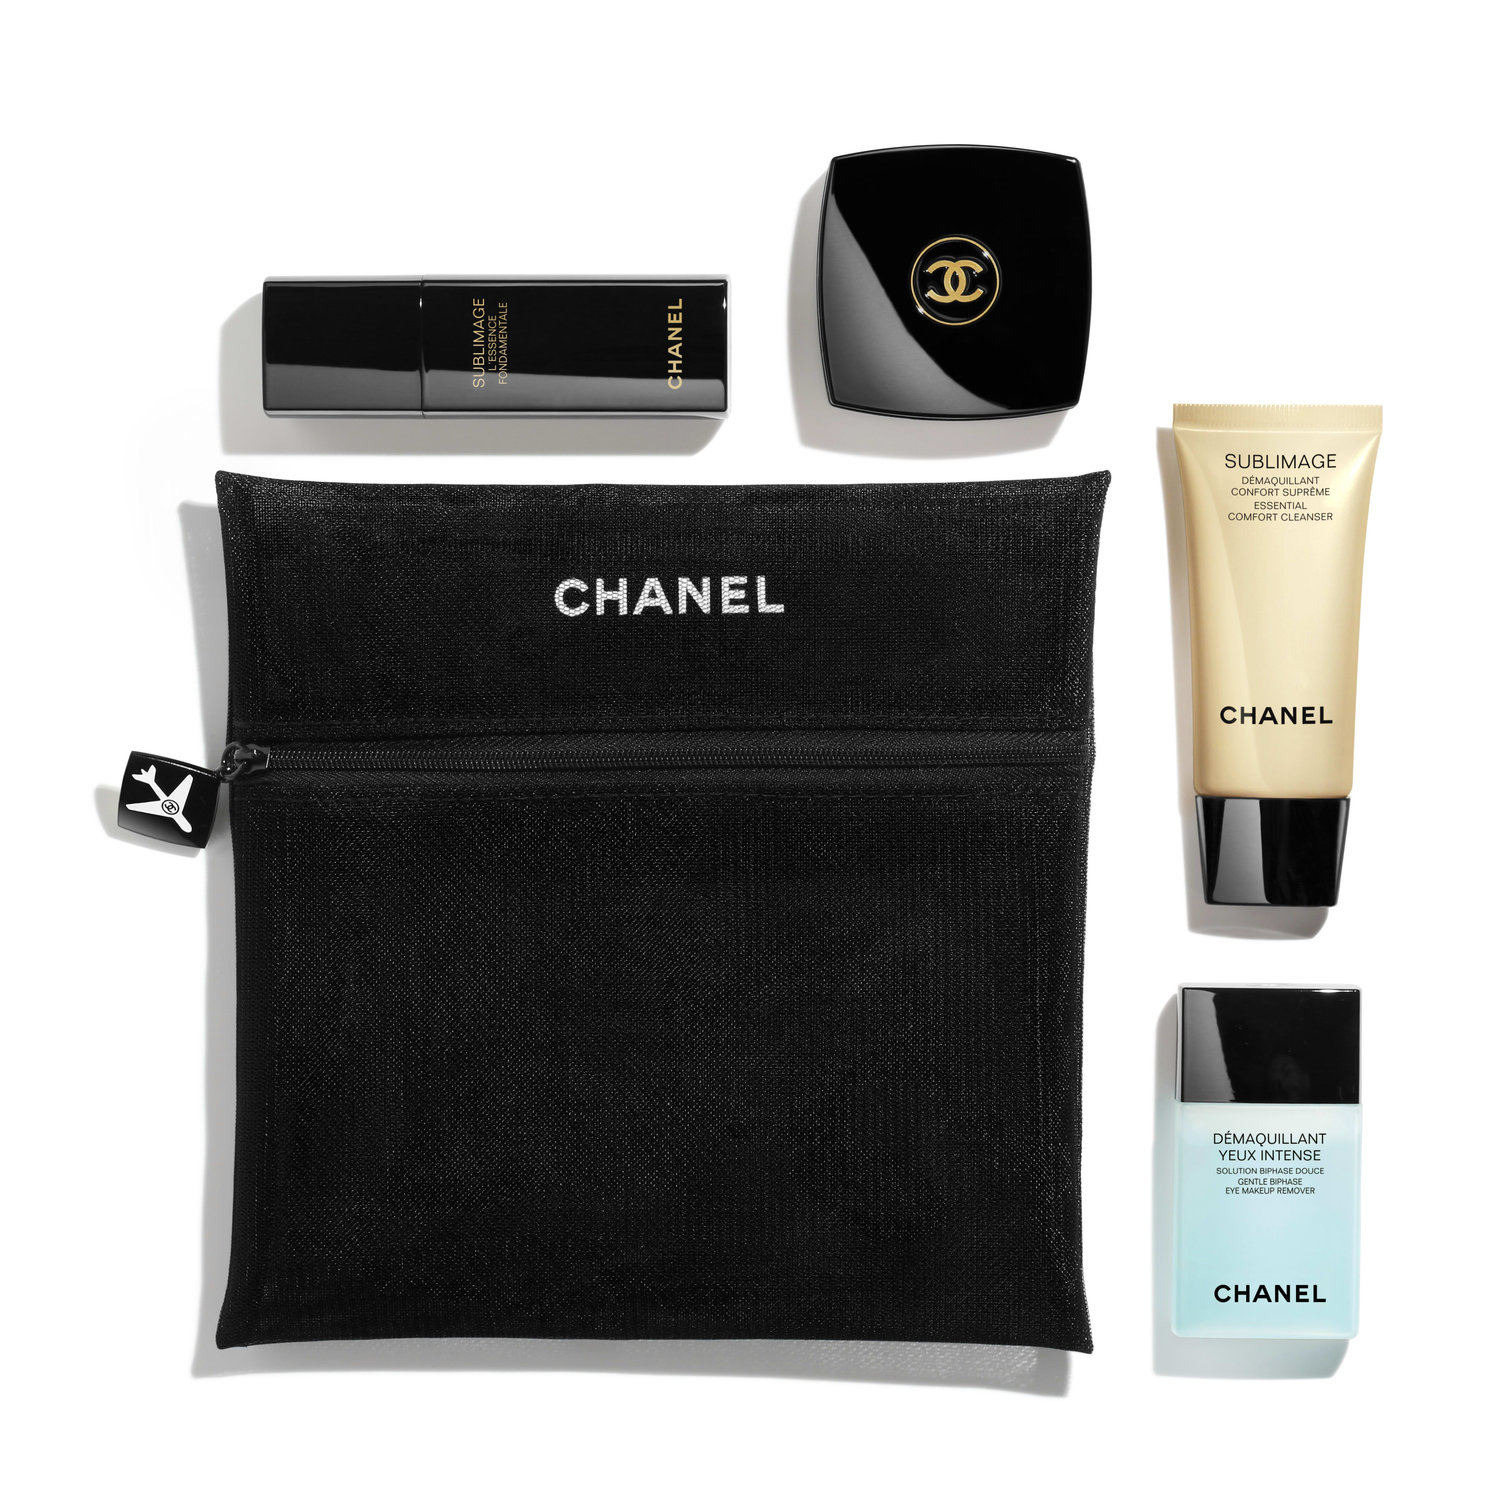 Chanel Travel Set is the Couture Skin Saviour